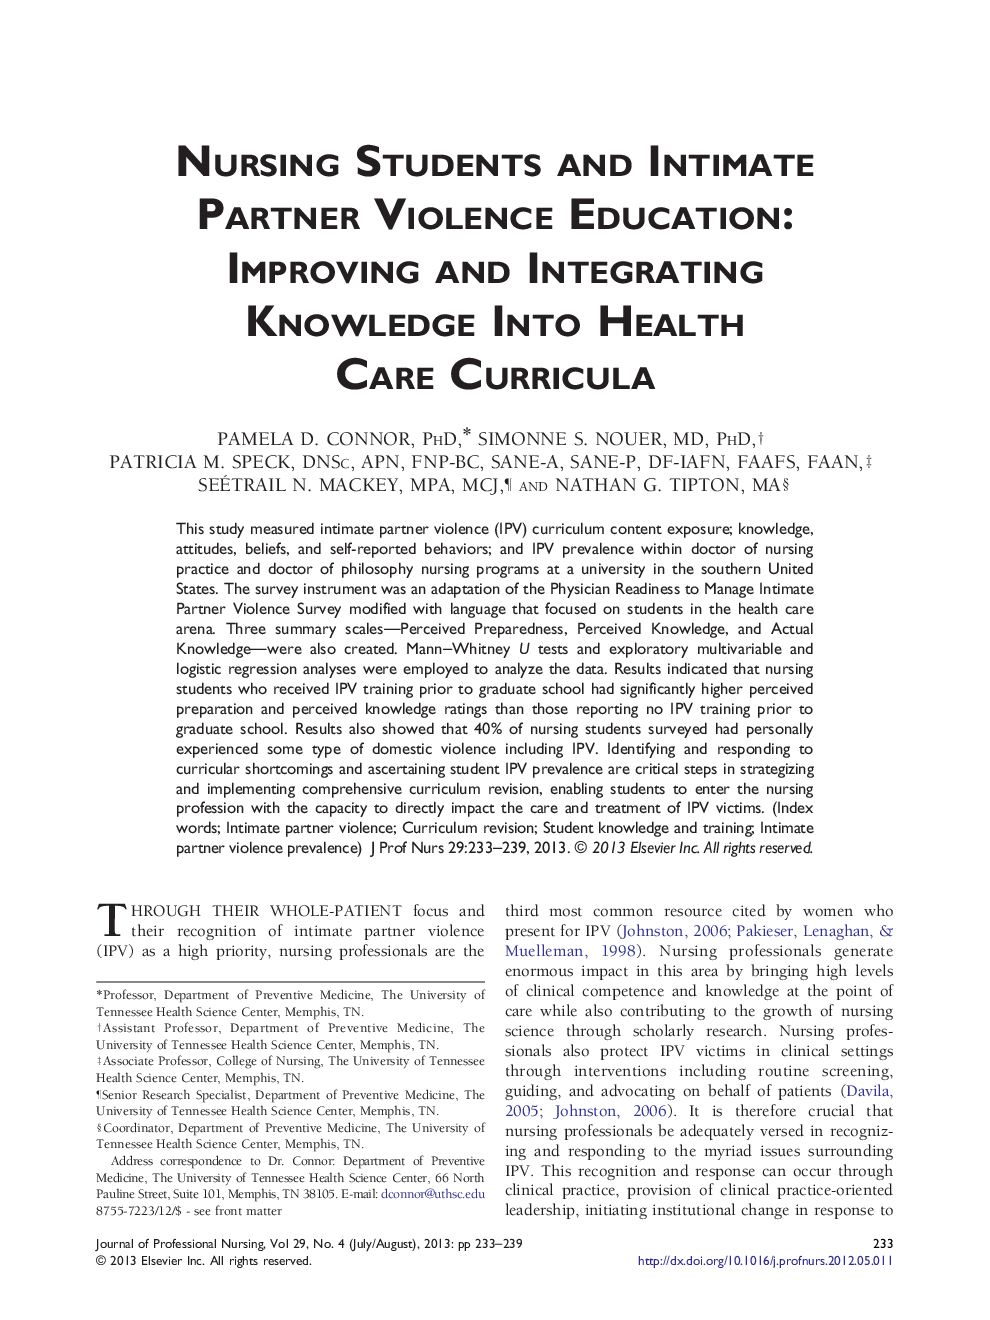 Nursing Students and Intimate Partner Violence Education: Improving and Integrating Knowledge Into Health Care Curricula